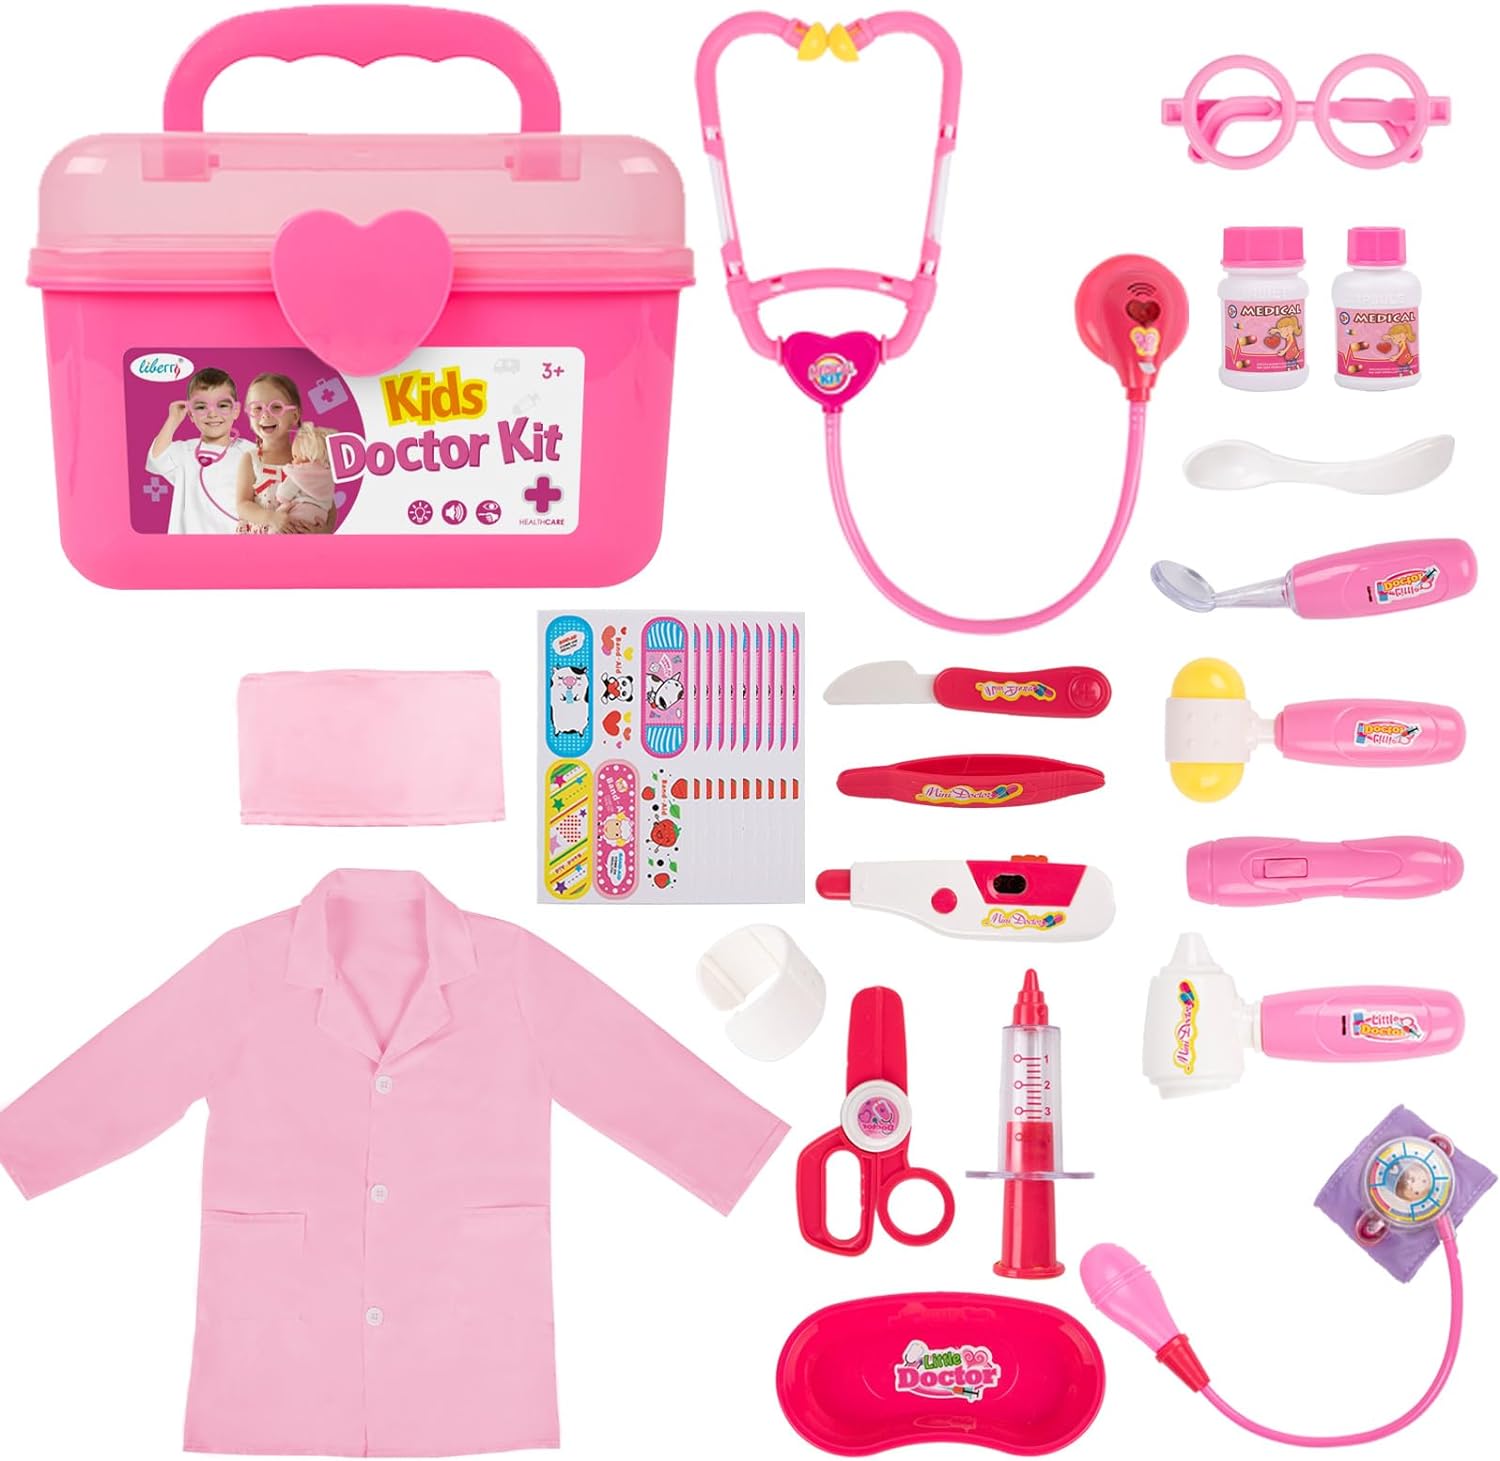 Liberry Toy Doctor Kit for Toddlers 3 4 5 Years Old, 30 Pcs Kids Doctor Playset Gift, Pretend Play Medical Set with Stethoscope, Doctor Role Play Dress Up Costume for Girls